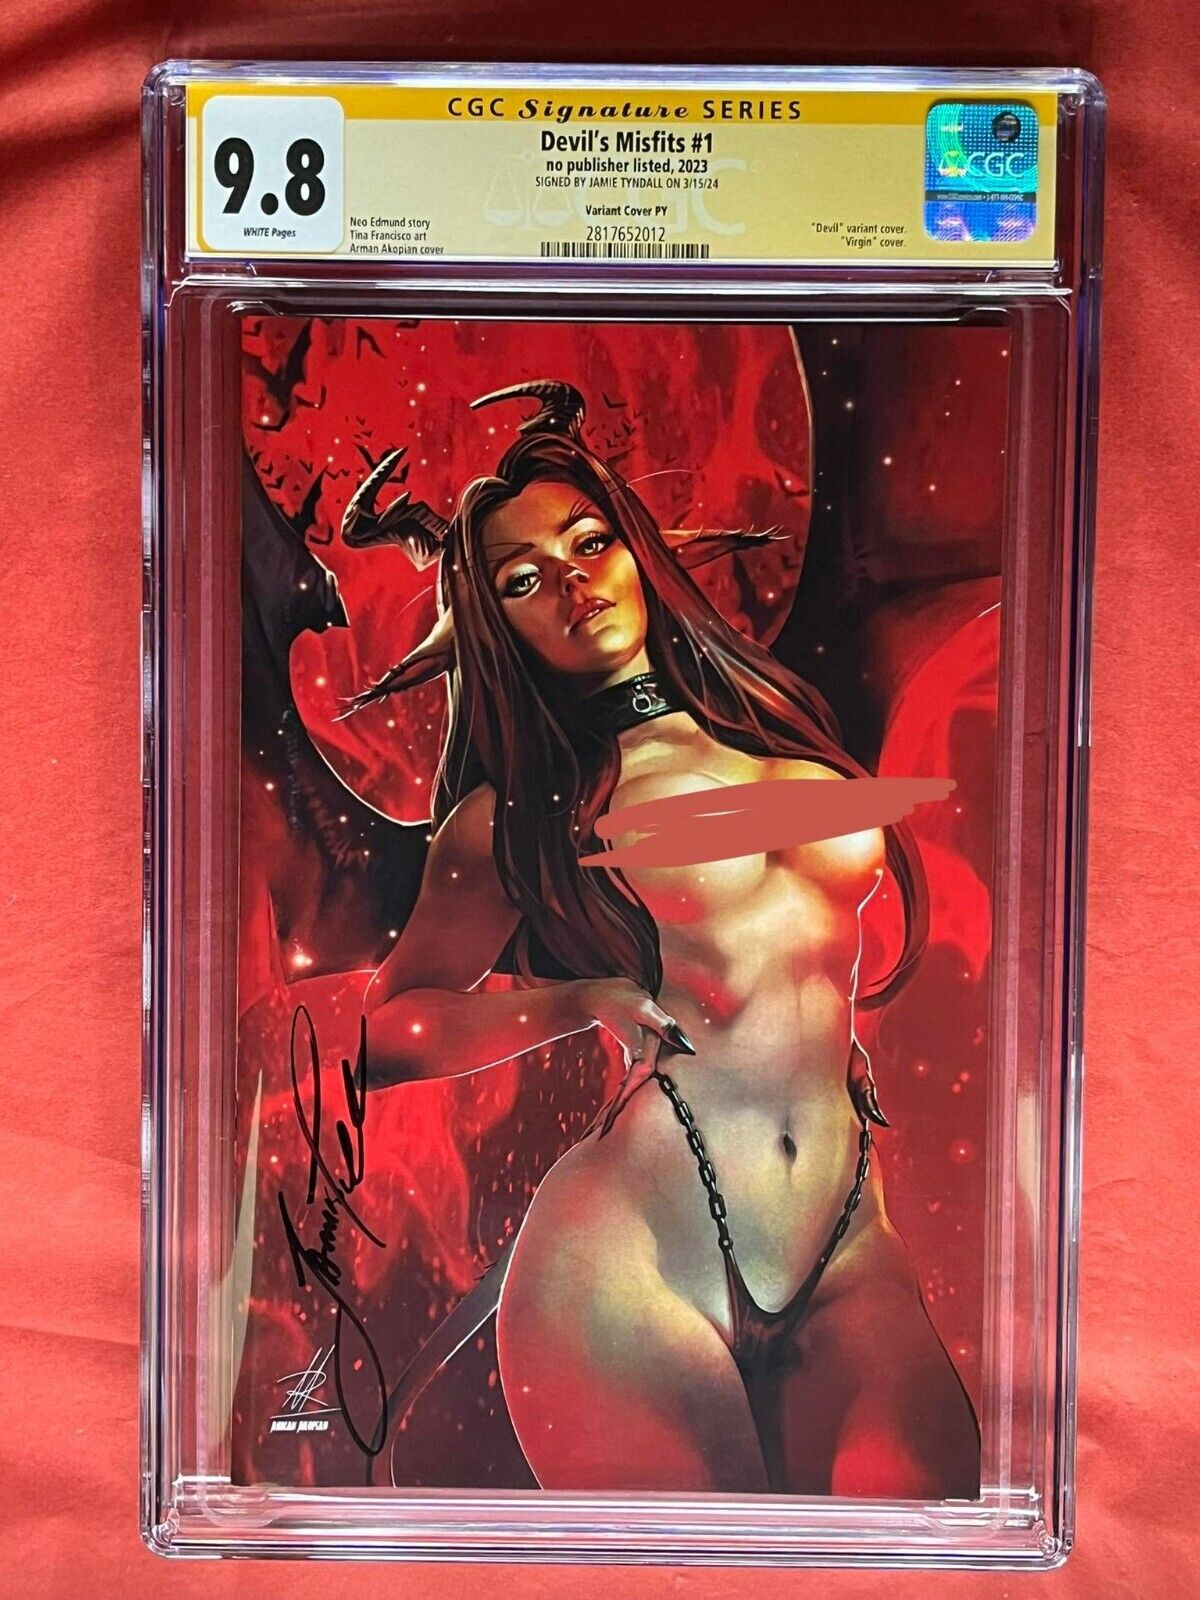 The Devil’s Misfits 1 Cover PY Variant CGC 9.8 SS signed by Jamie Tyndall